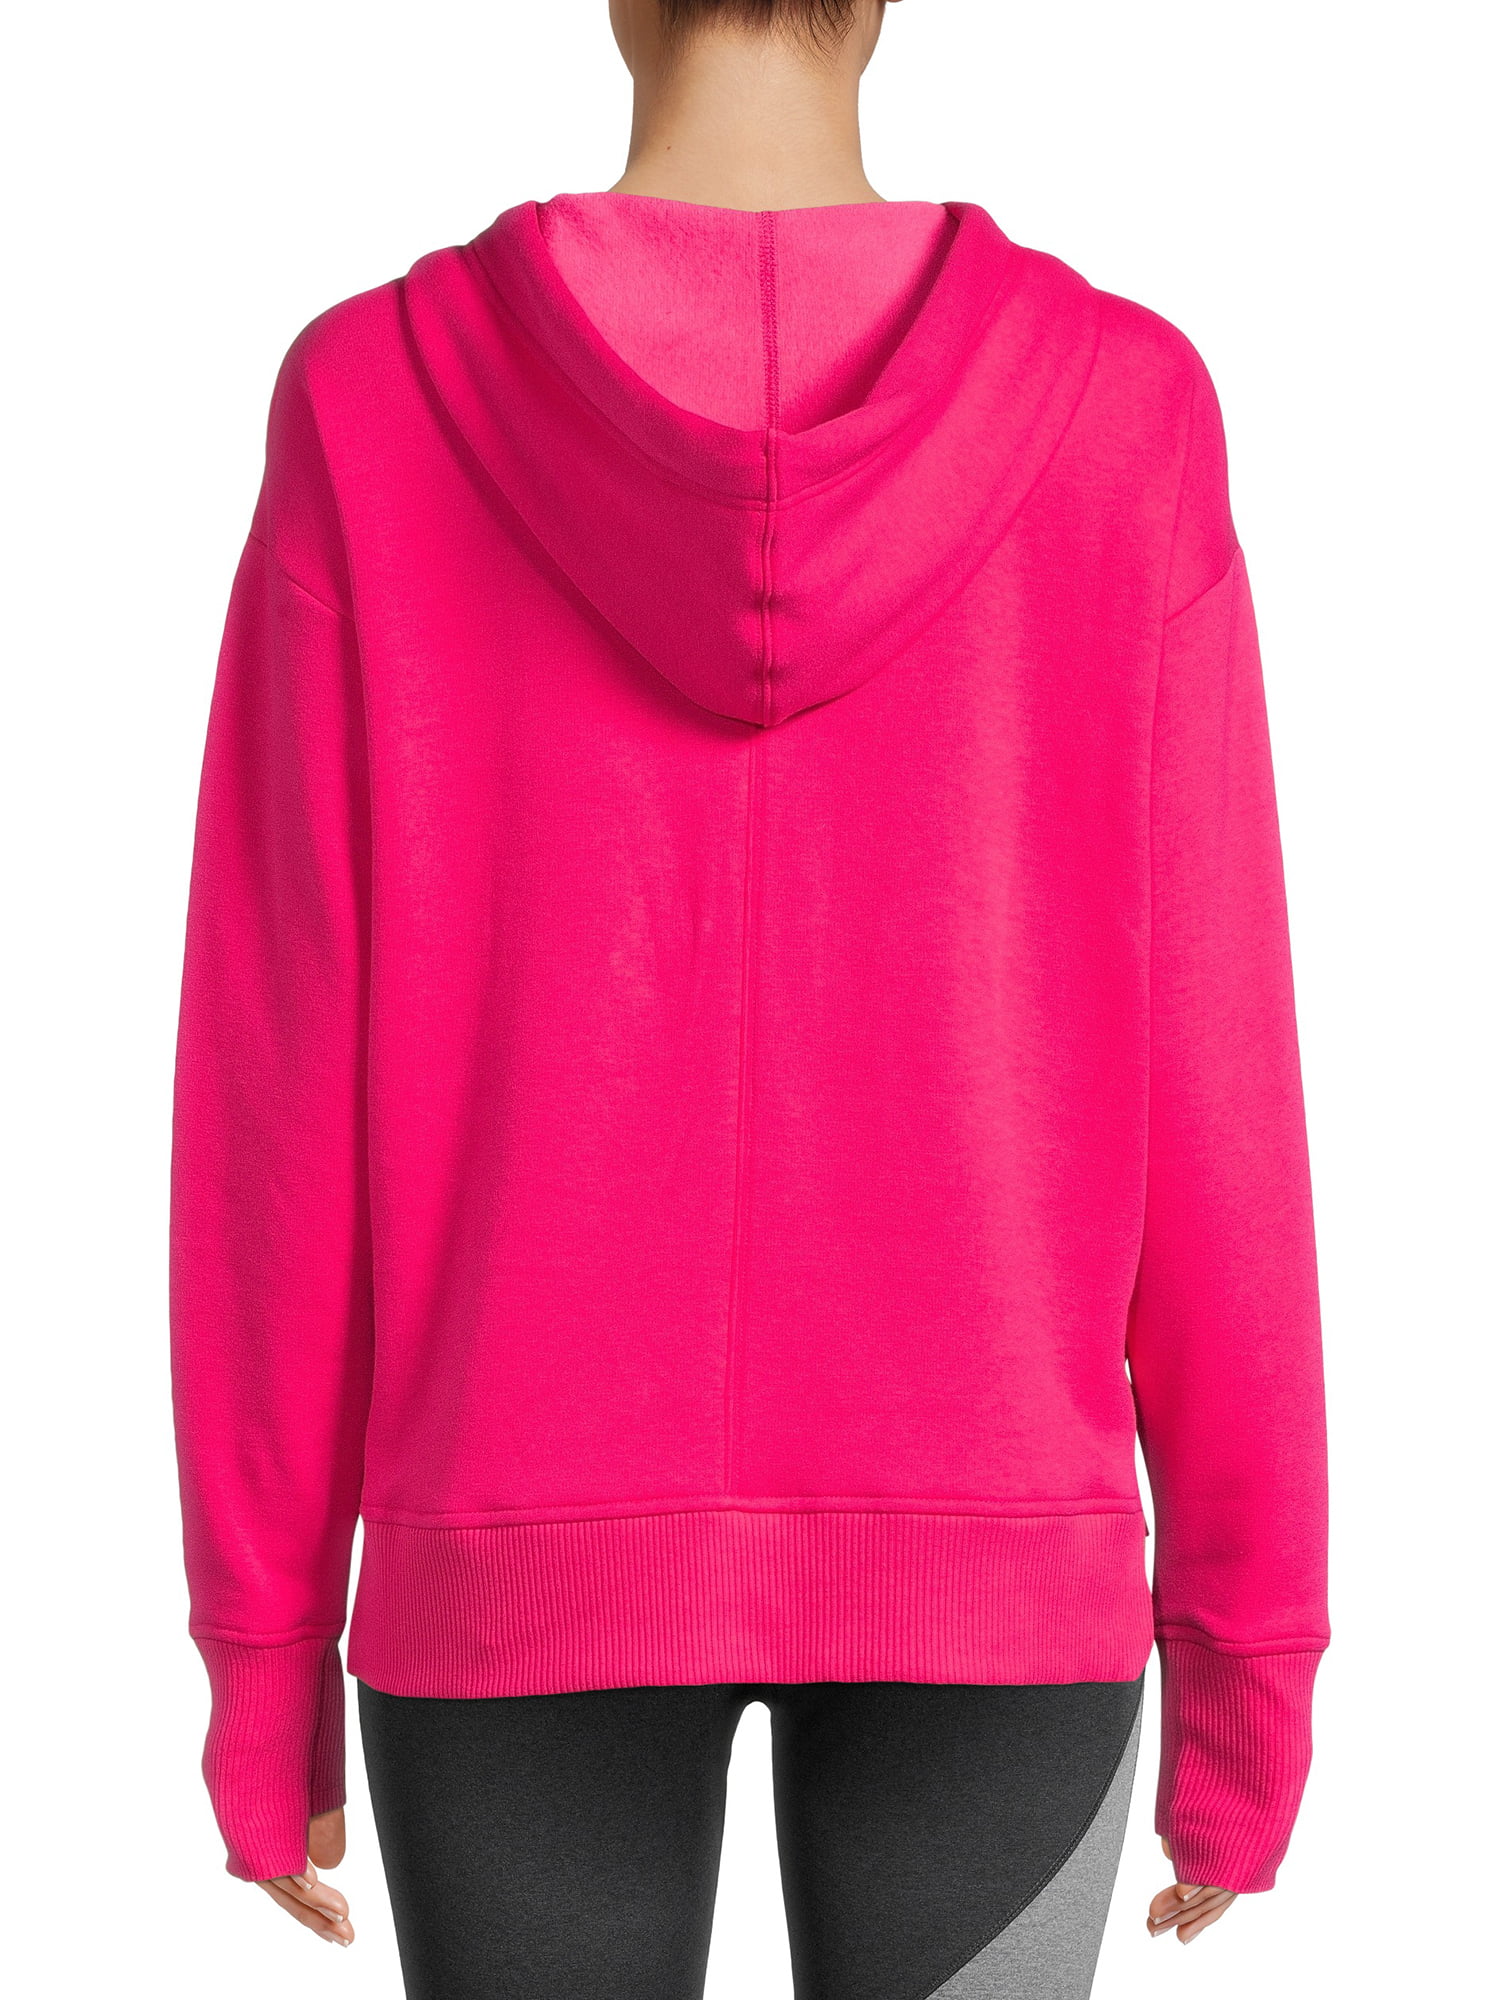 Avia Women's Light Hoody - clothing & accessories - by owner - apparel sale  - craigslist